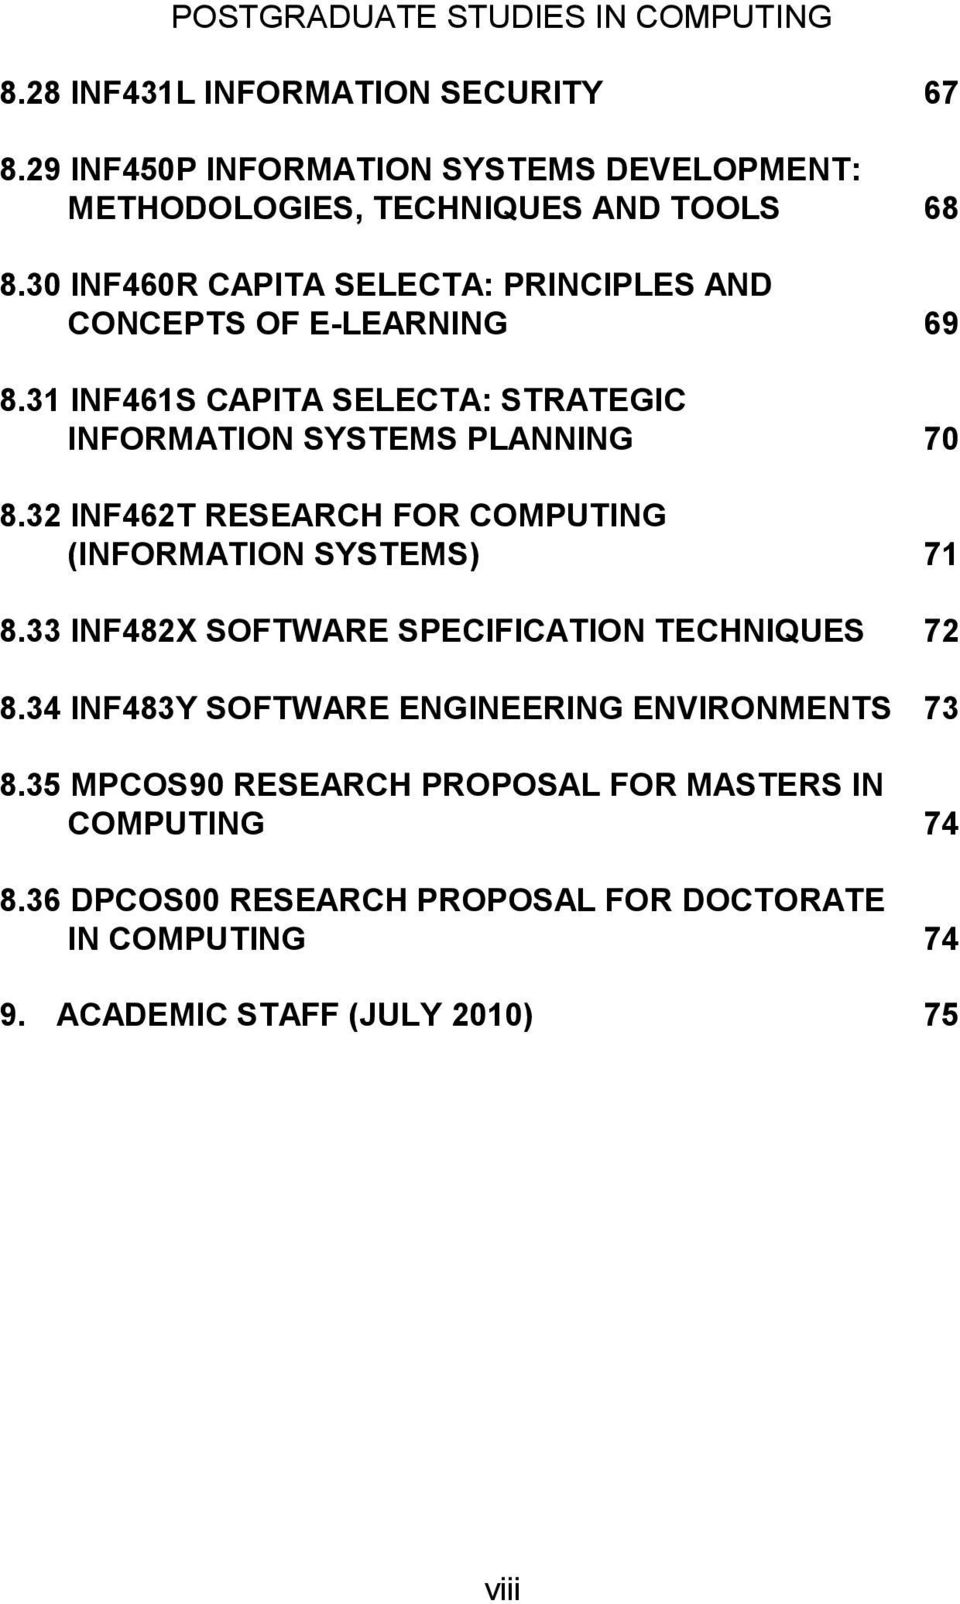 32 INF462T RESEARCH FOR COMPUTING (INFORMATION SYSTEMS) 71 8.33 INF482X SOFTWARE SPECIFICATION TECHNIQUES 72 8.